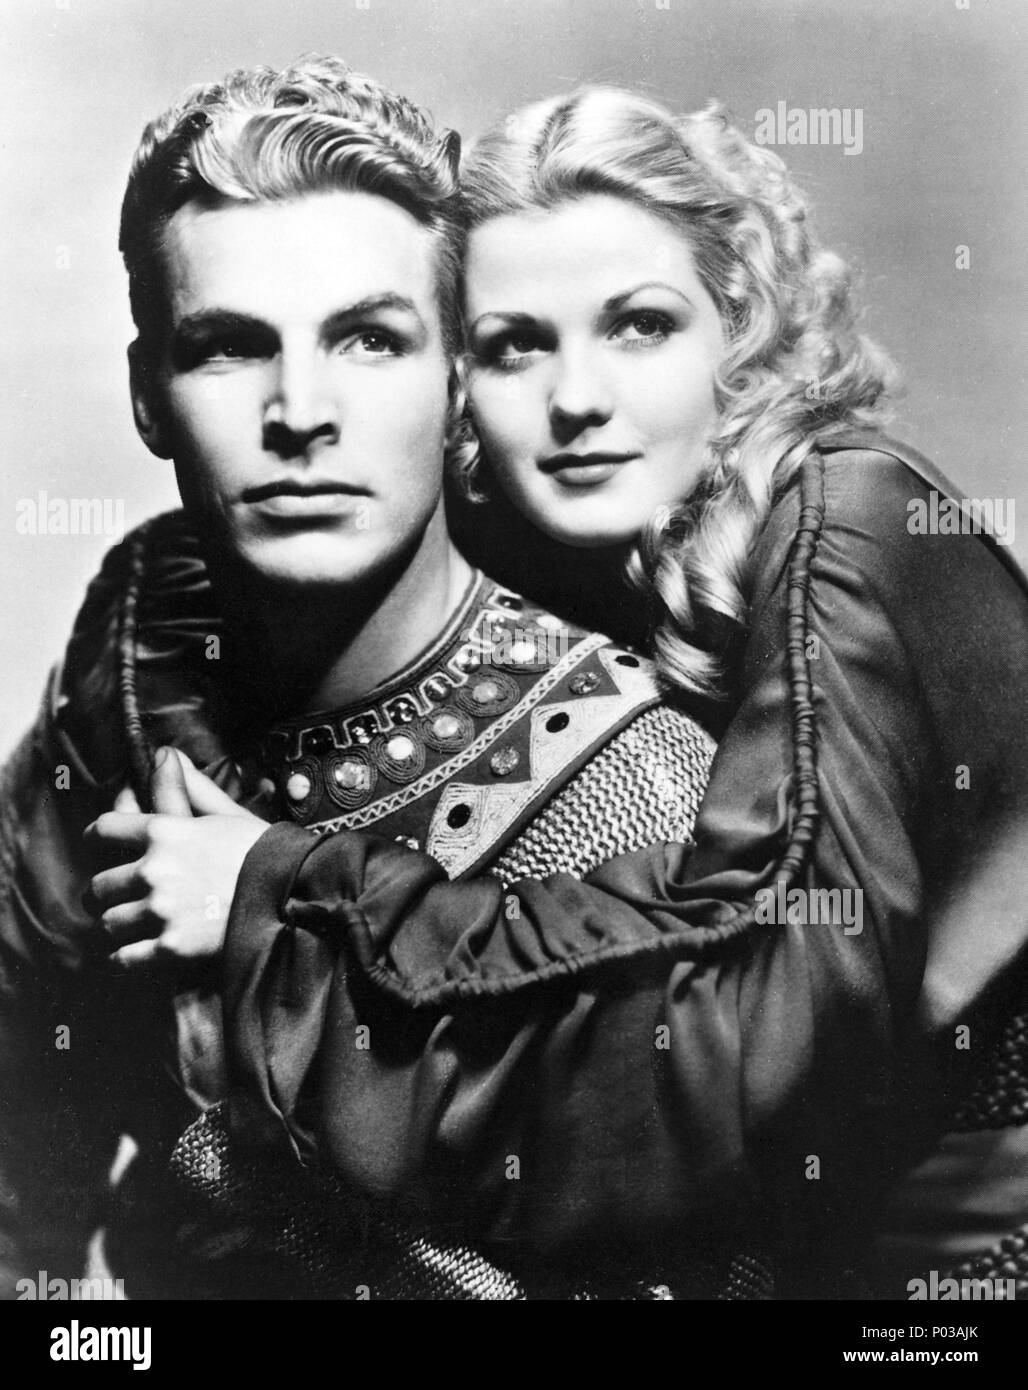 Buster Crabbe - Openwaterpedia